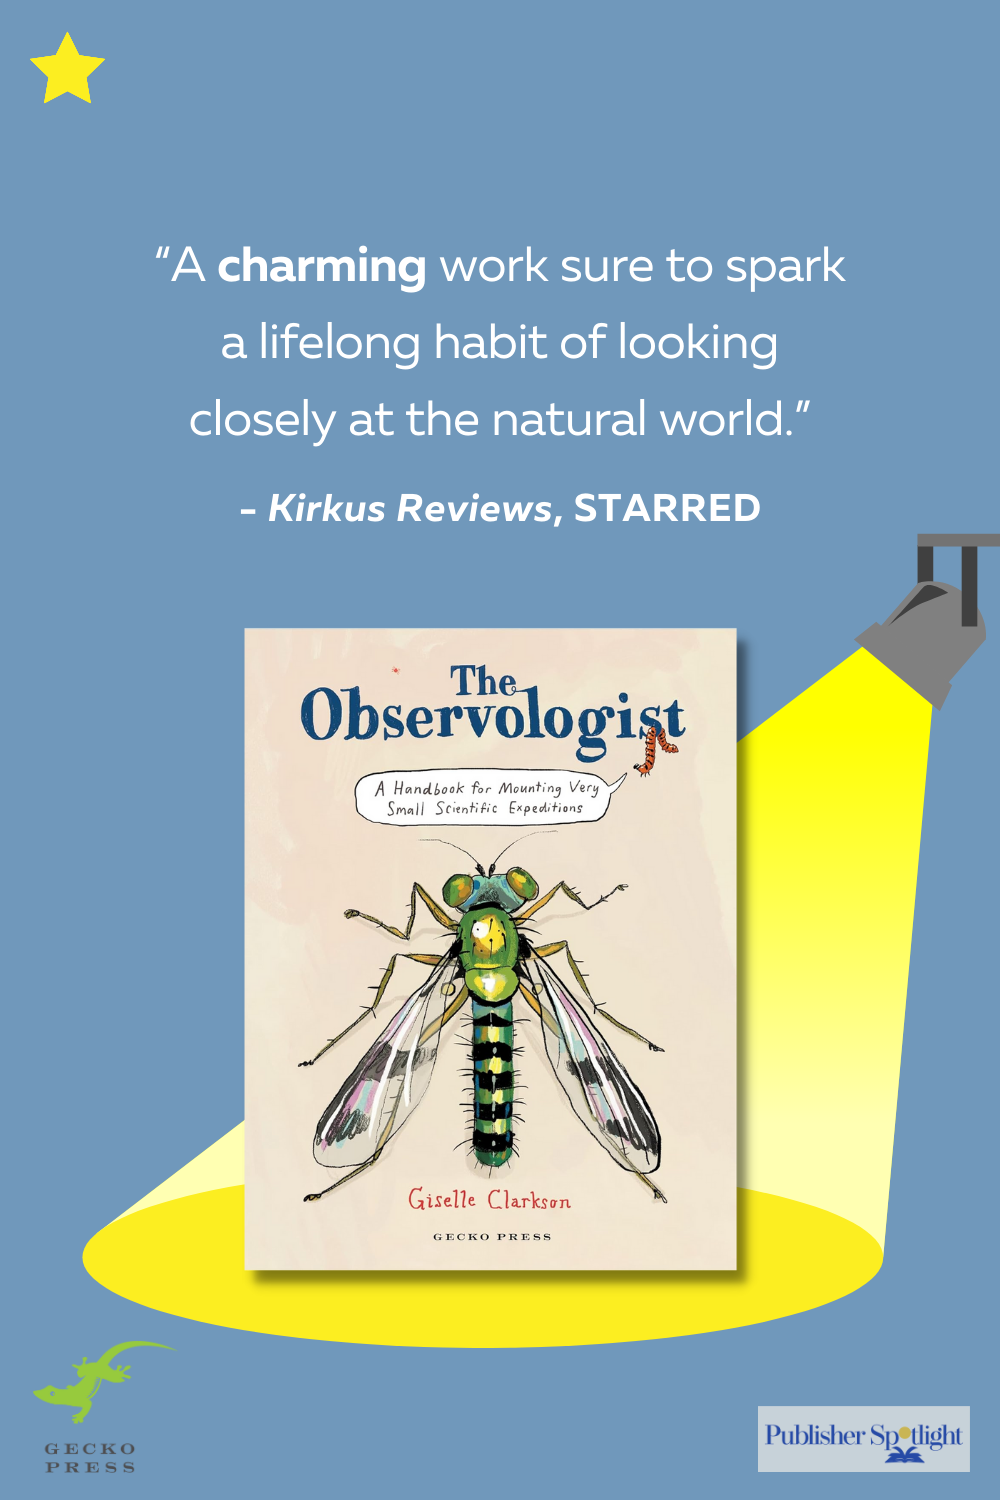 Starred Review Pin for The Observologist